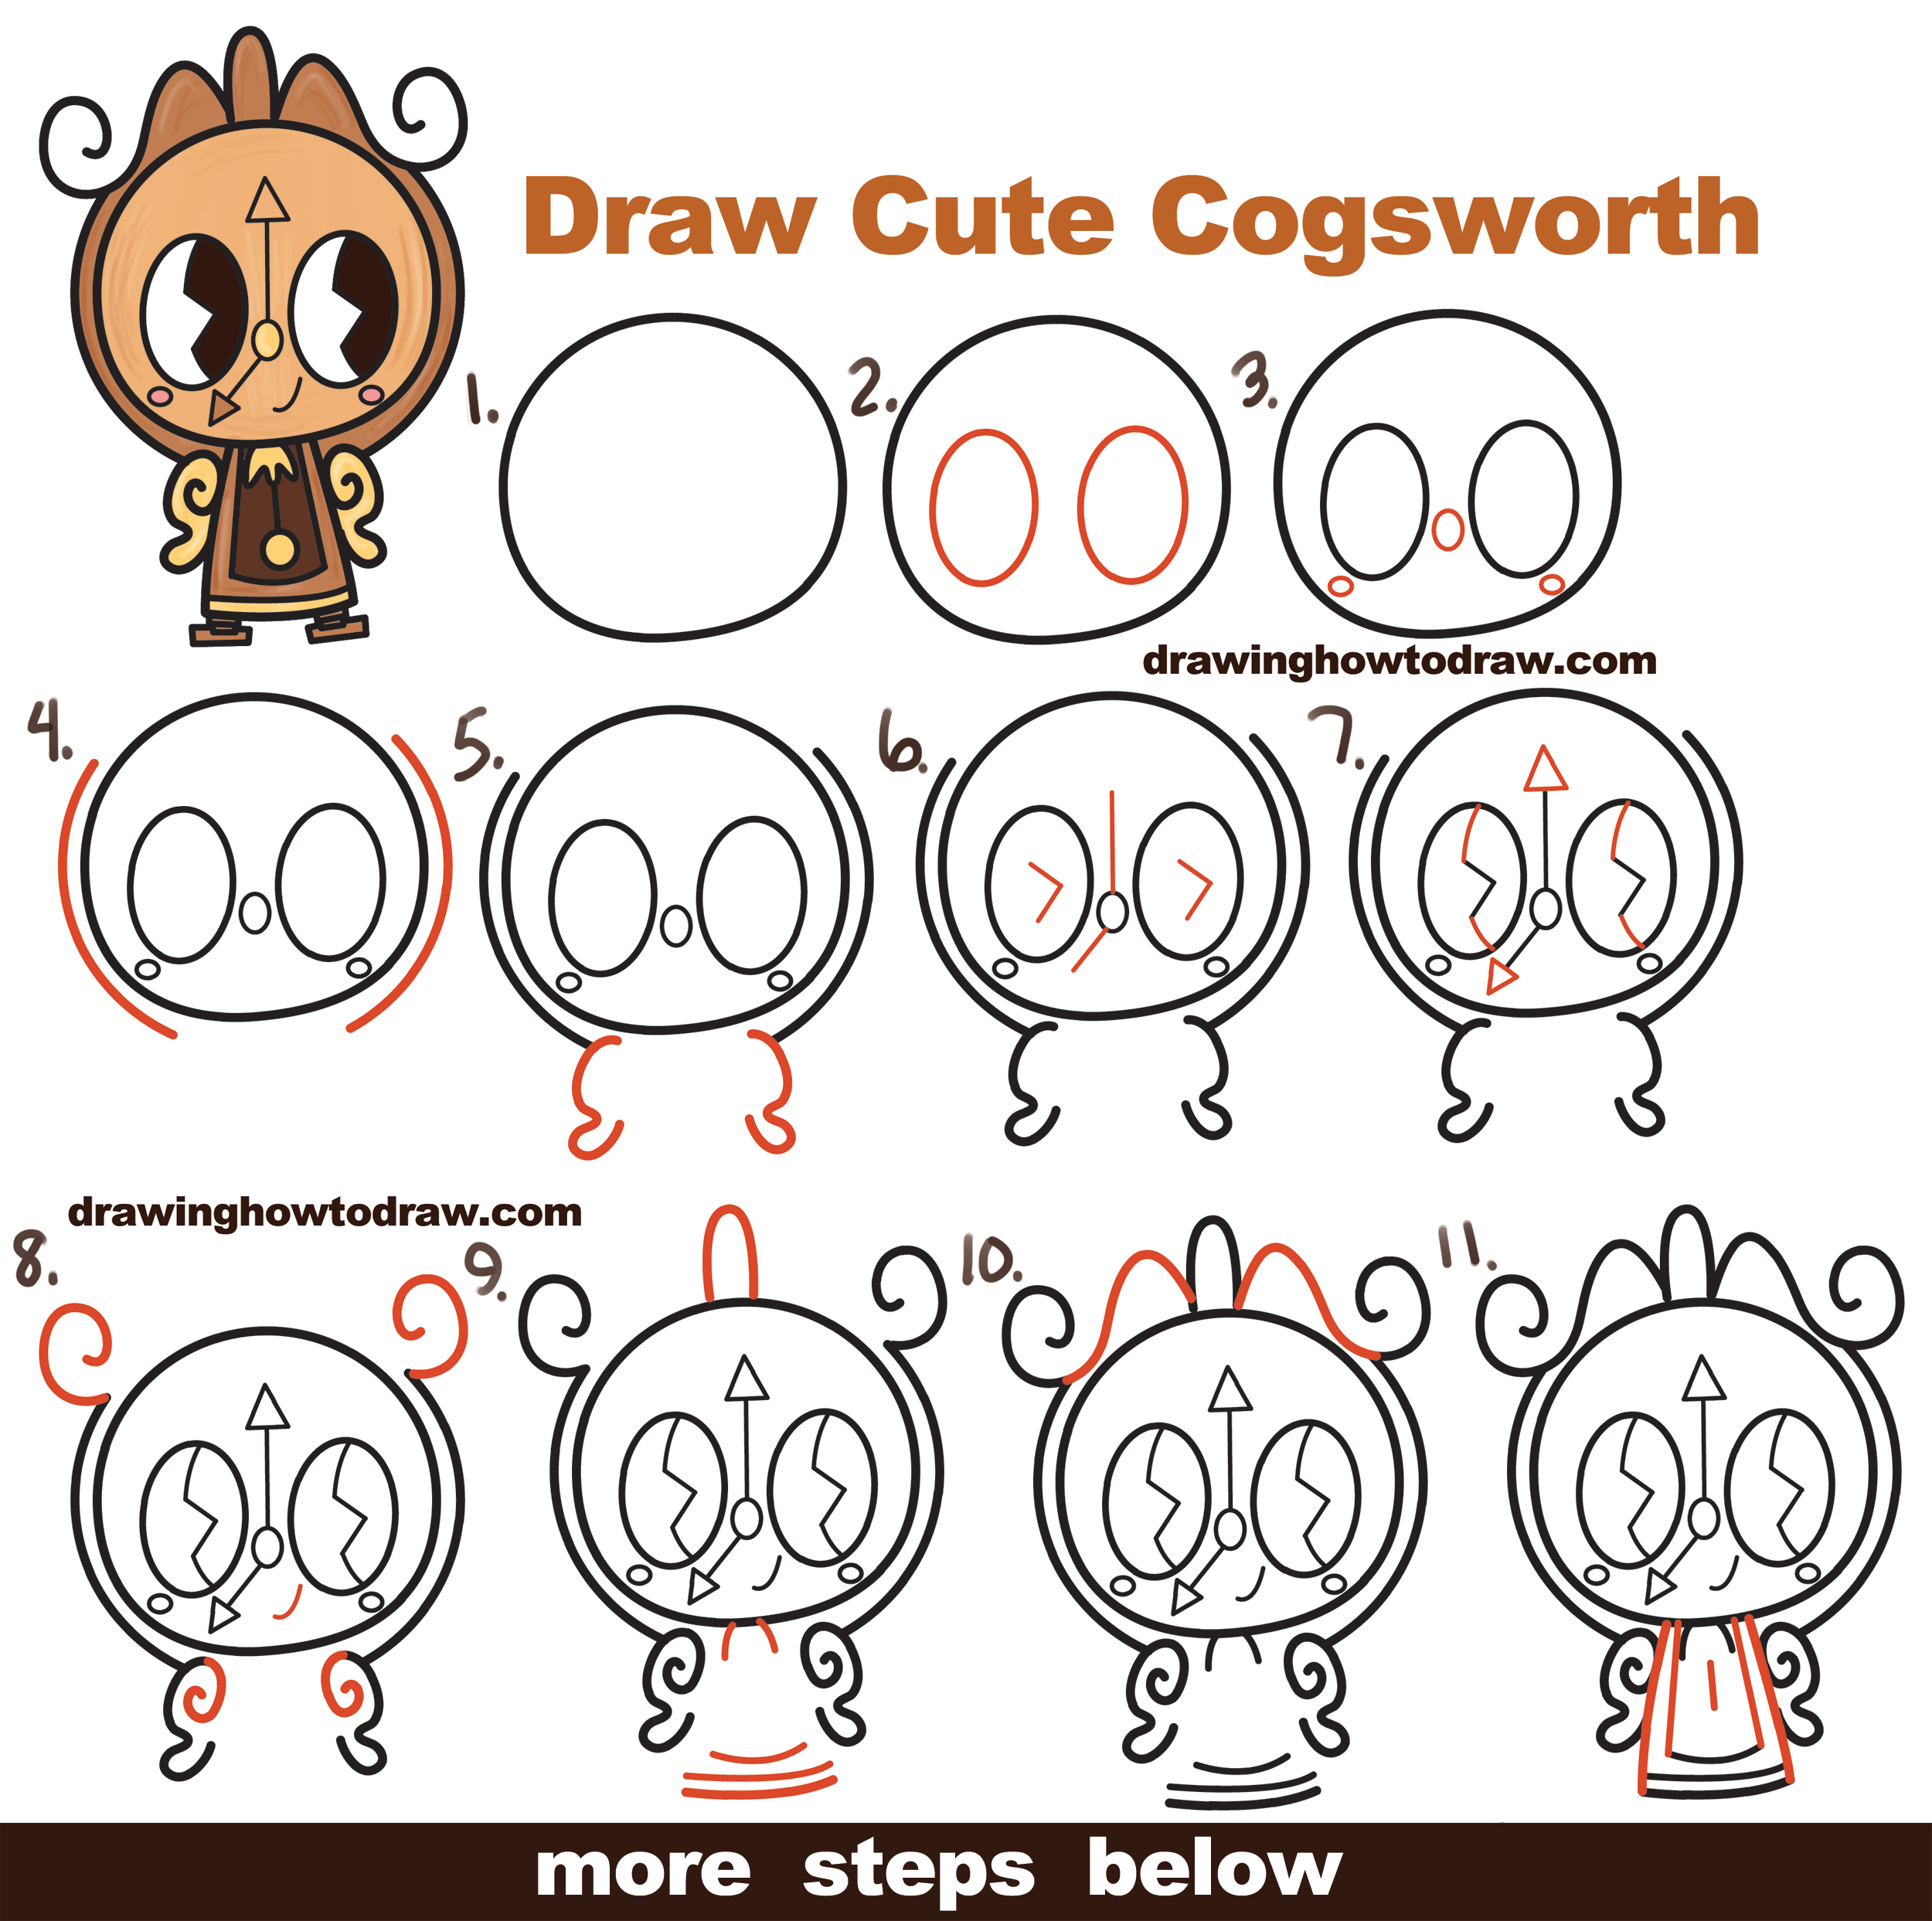 How to Draw Cute Kawaii Chibi Cogsworth the Clock from Beauty and the